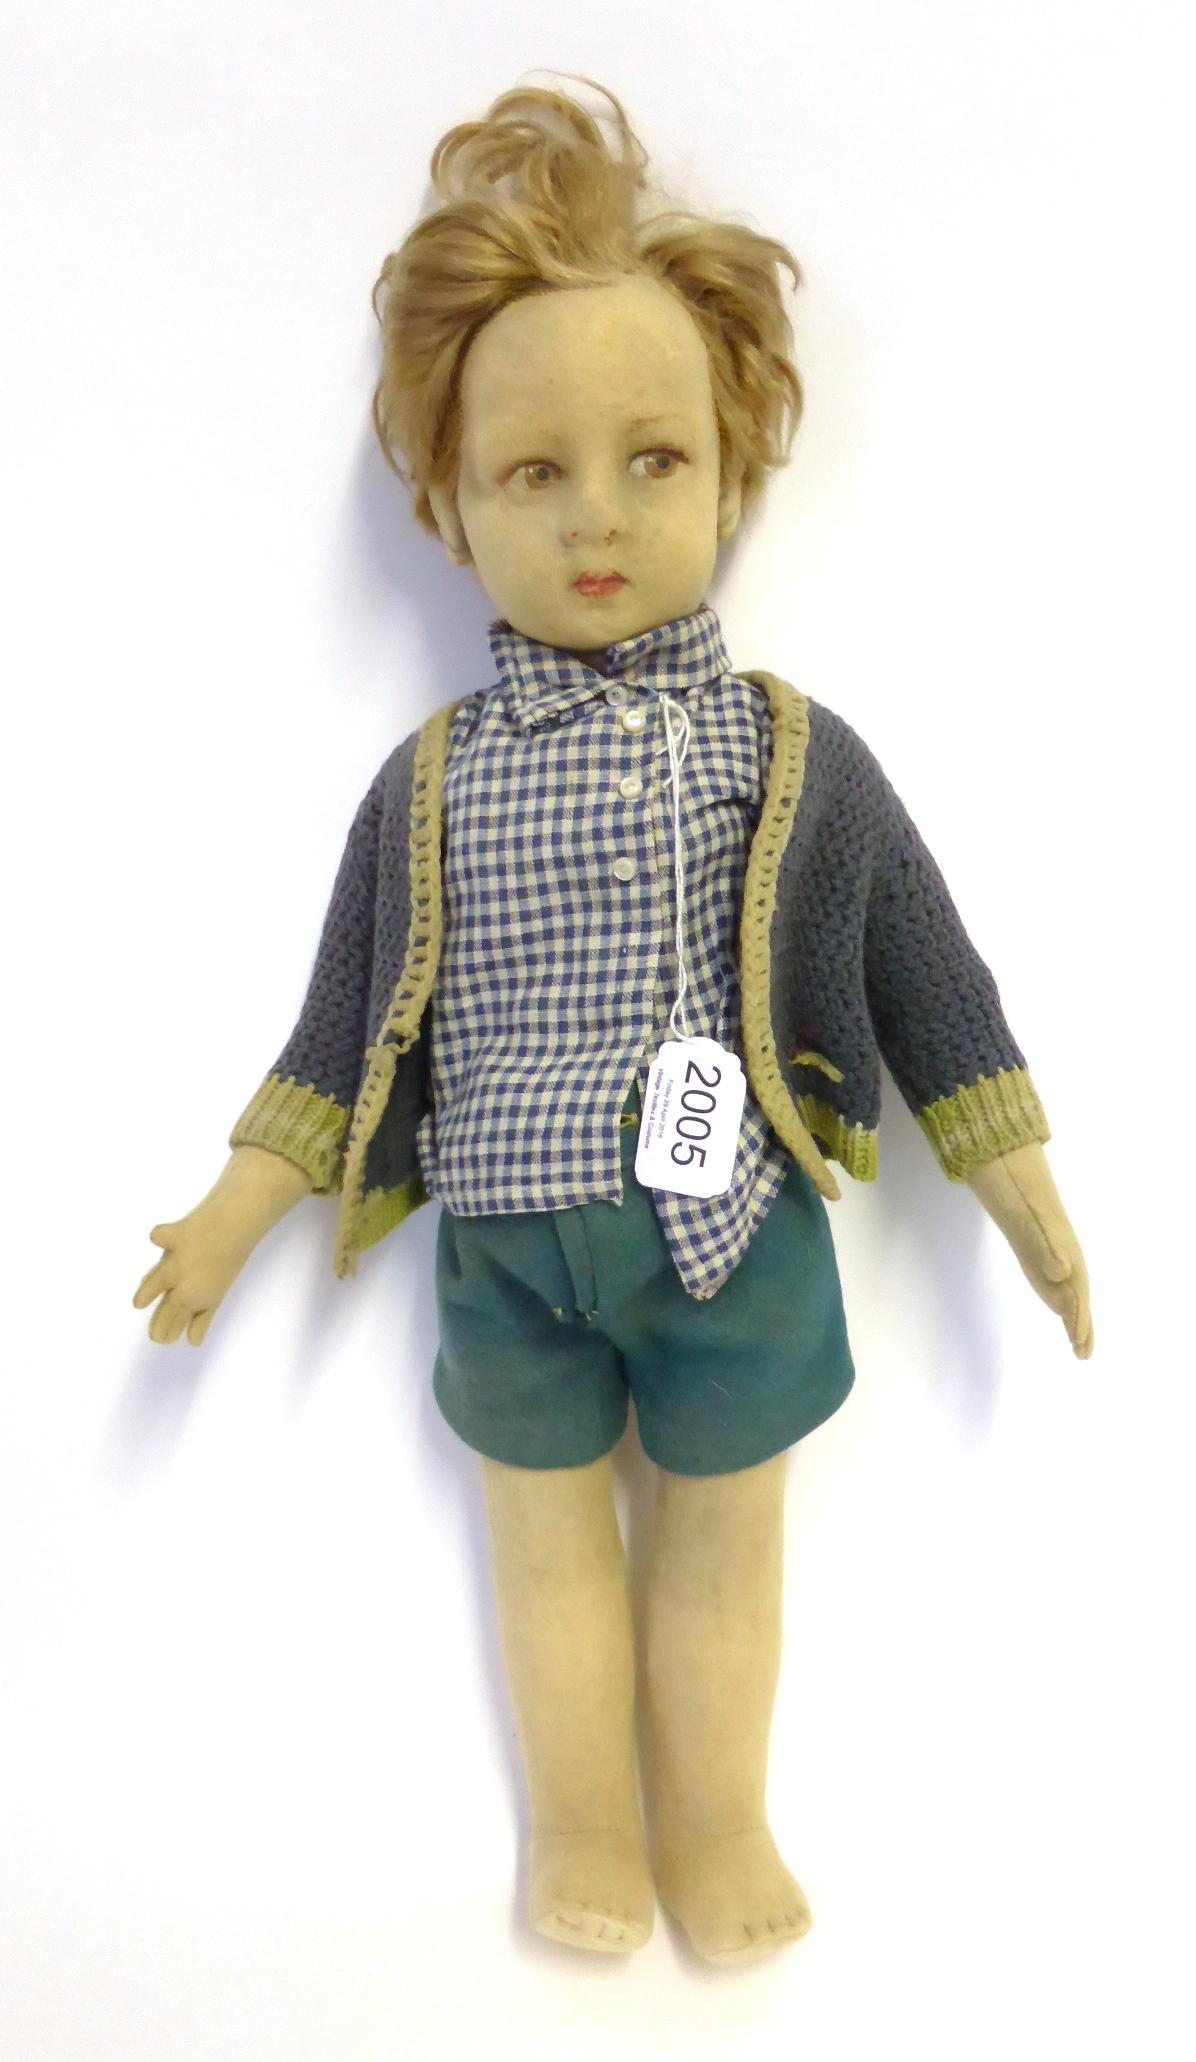 Circa 1930s Lenci Fabric Boy Doll, with jointed body, brown side glancing painted eyes, light auburn